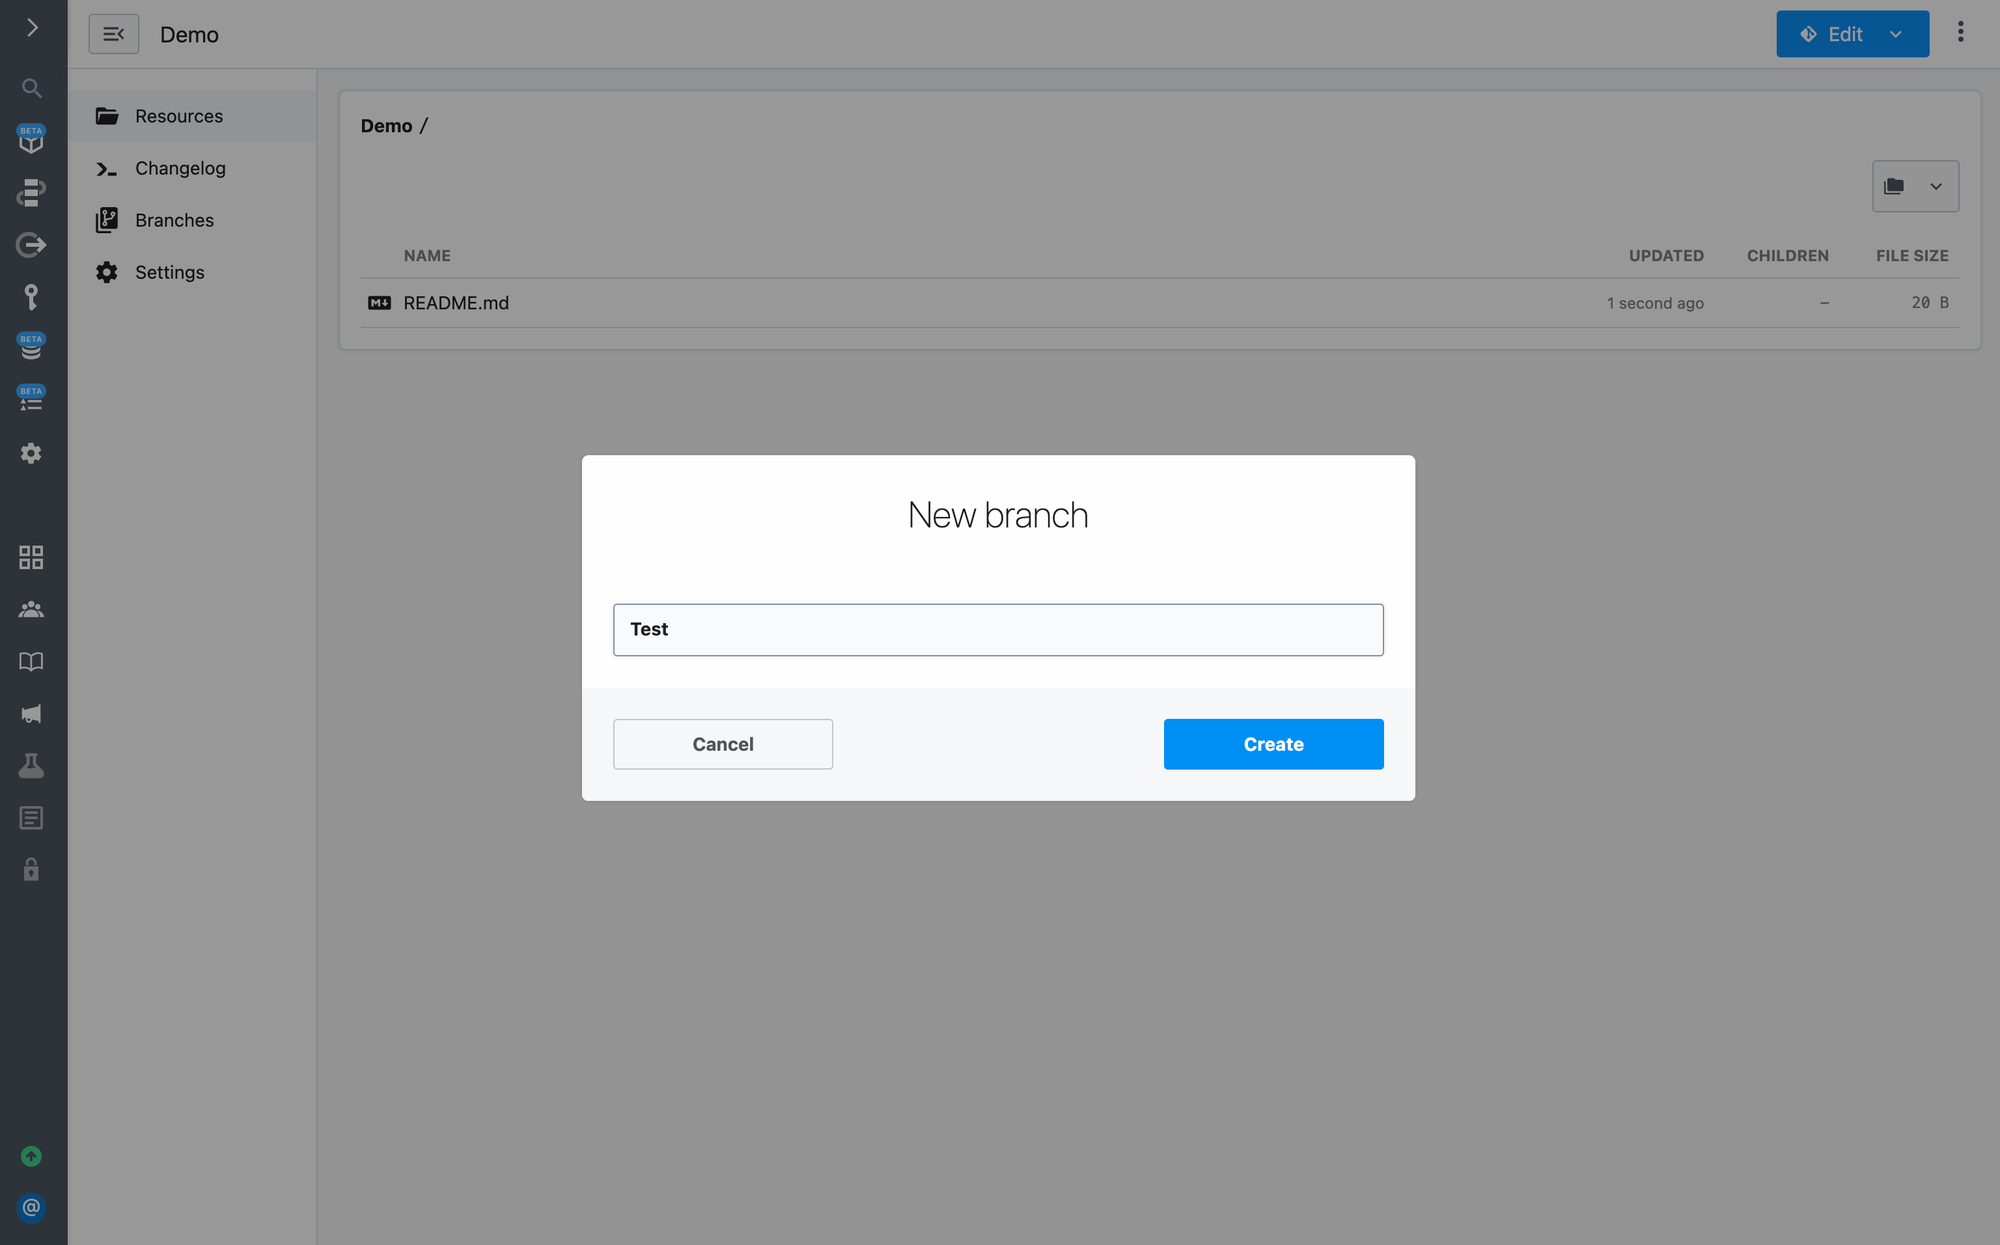 Enter your desired branch name, and click create to create the branch